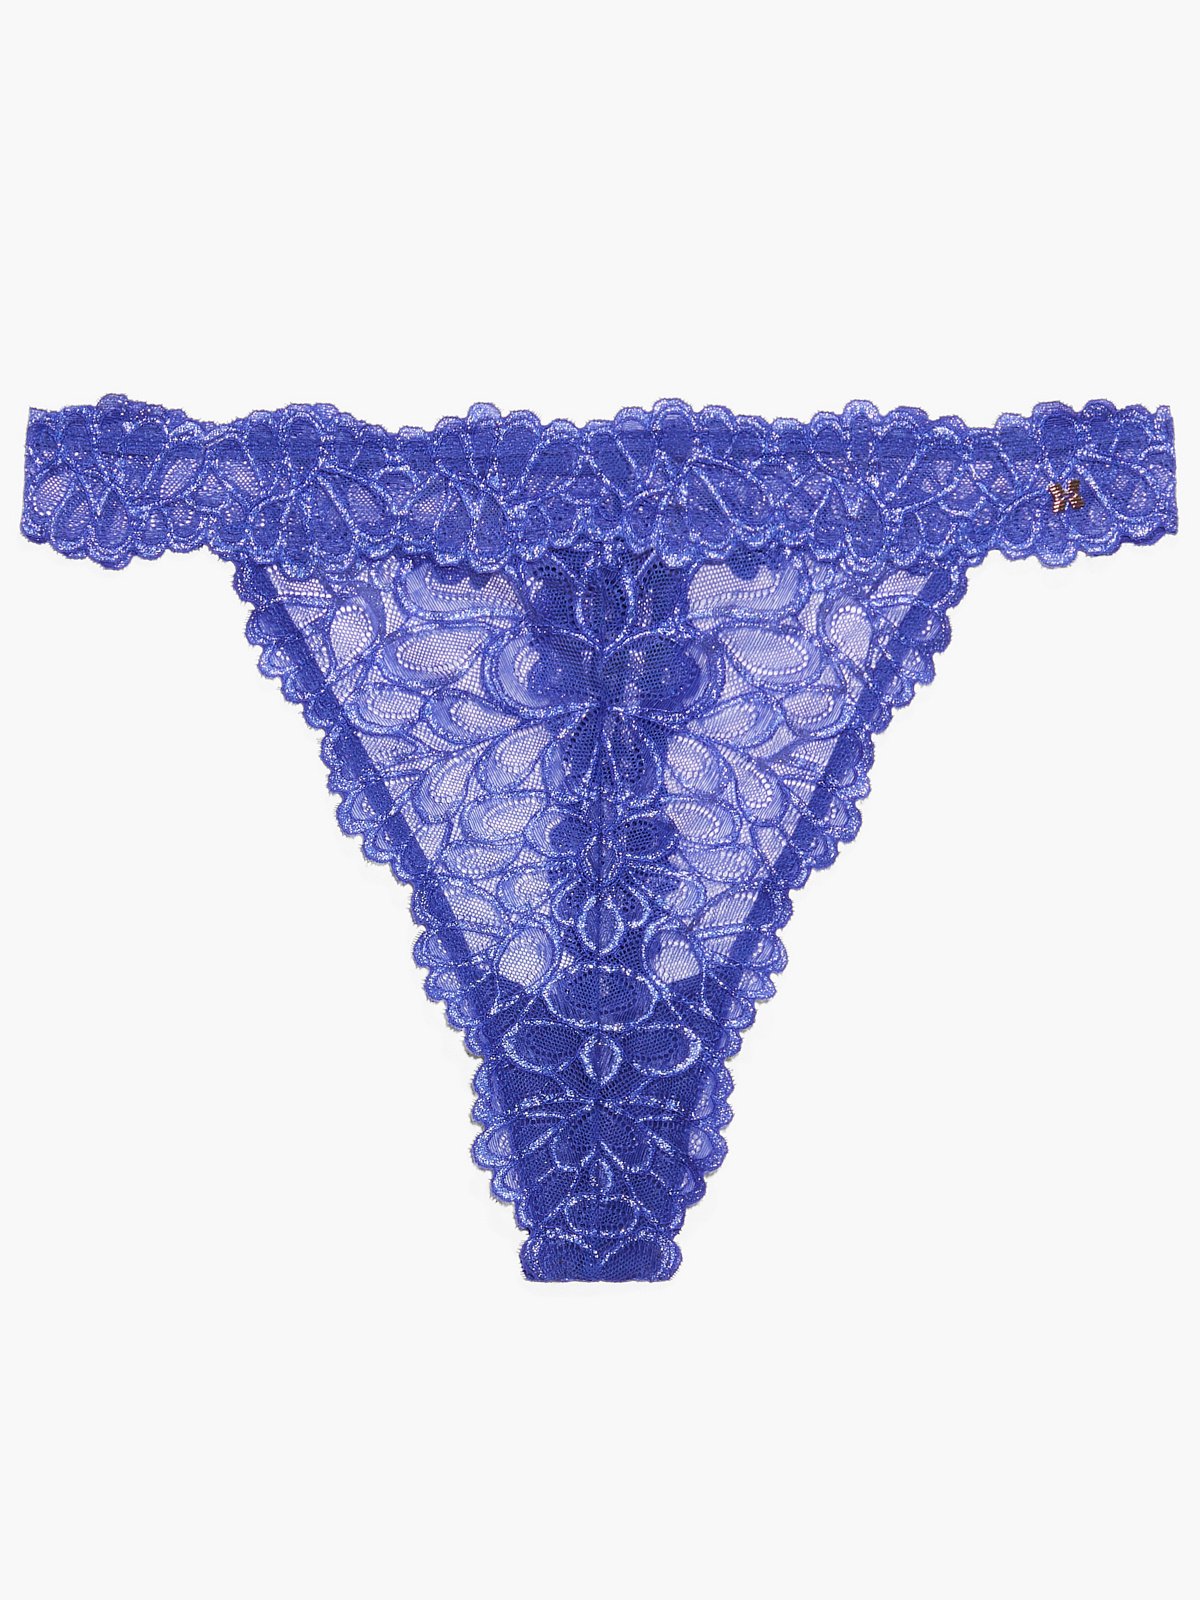 Savage Not Sorry Lace Thong Panty in Blue